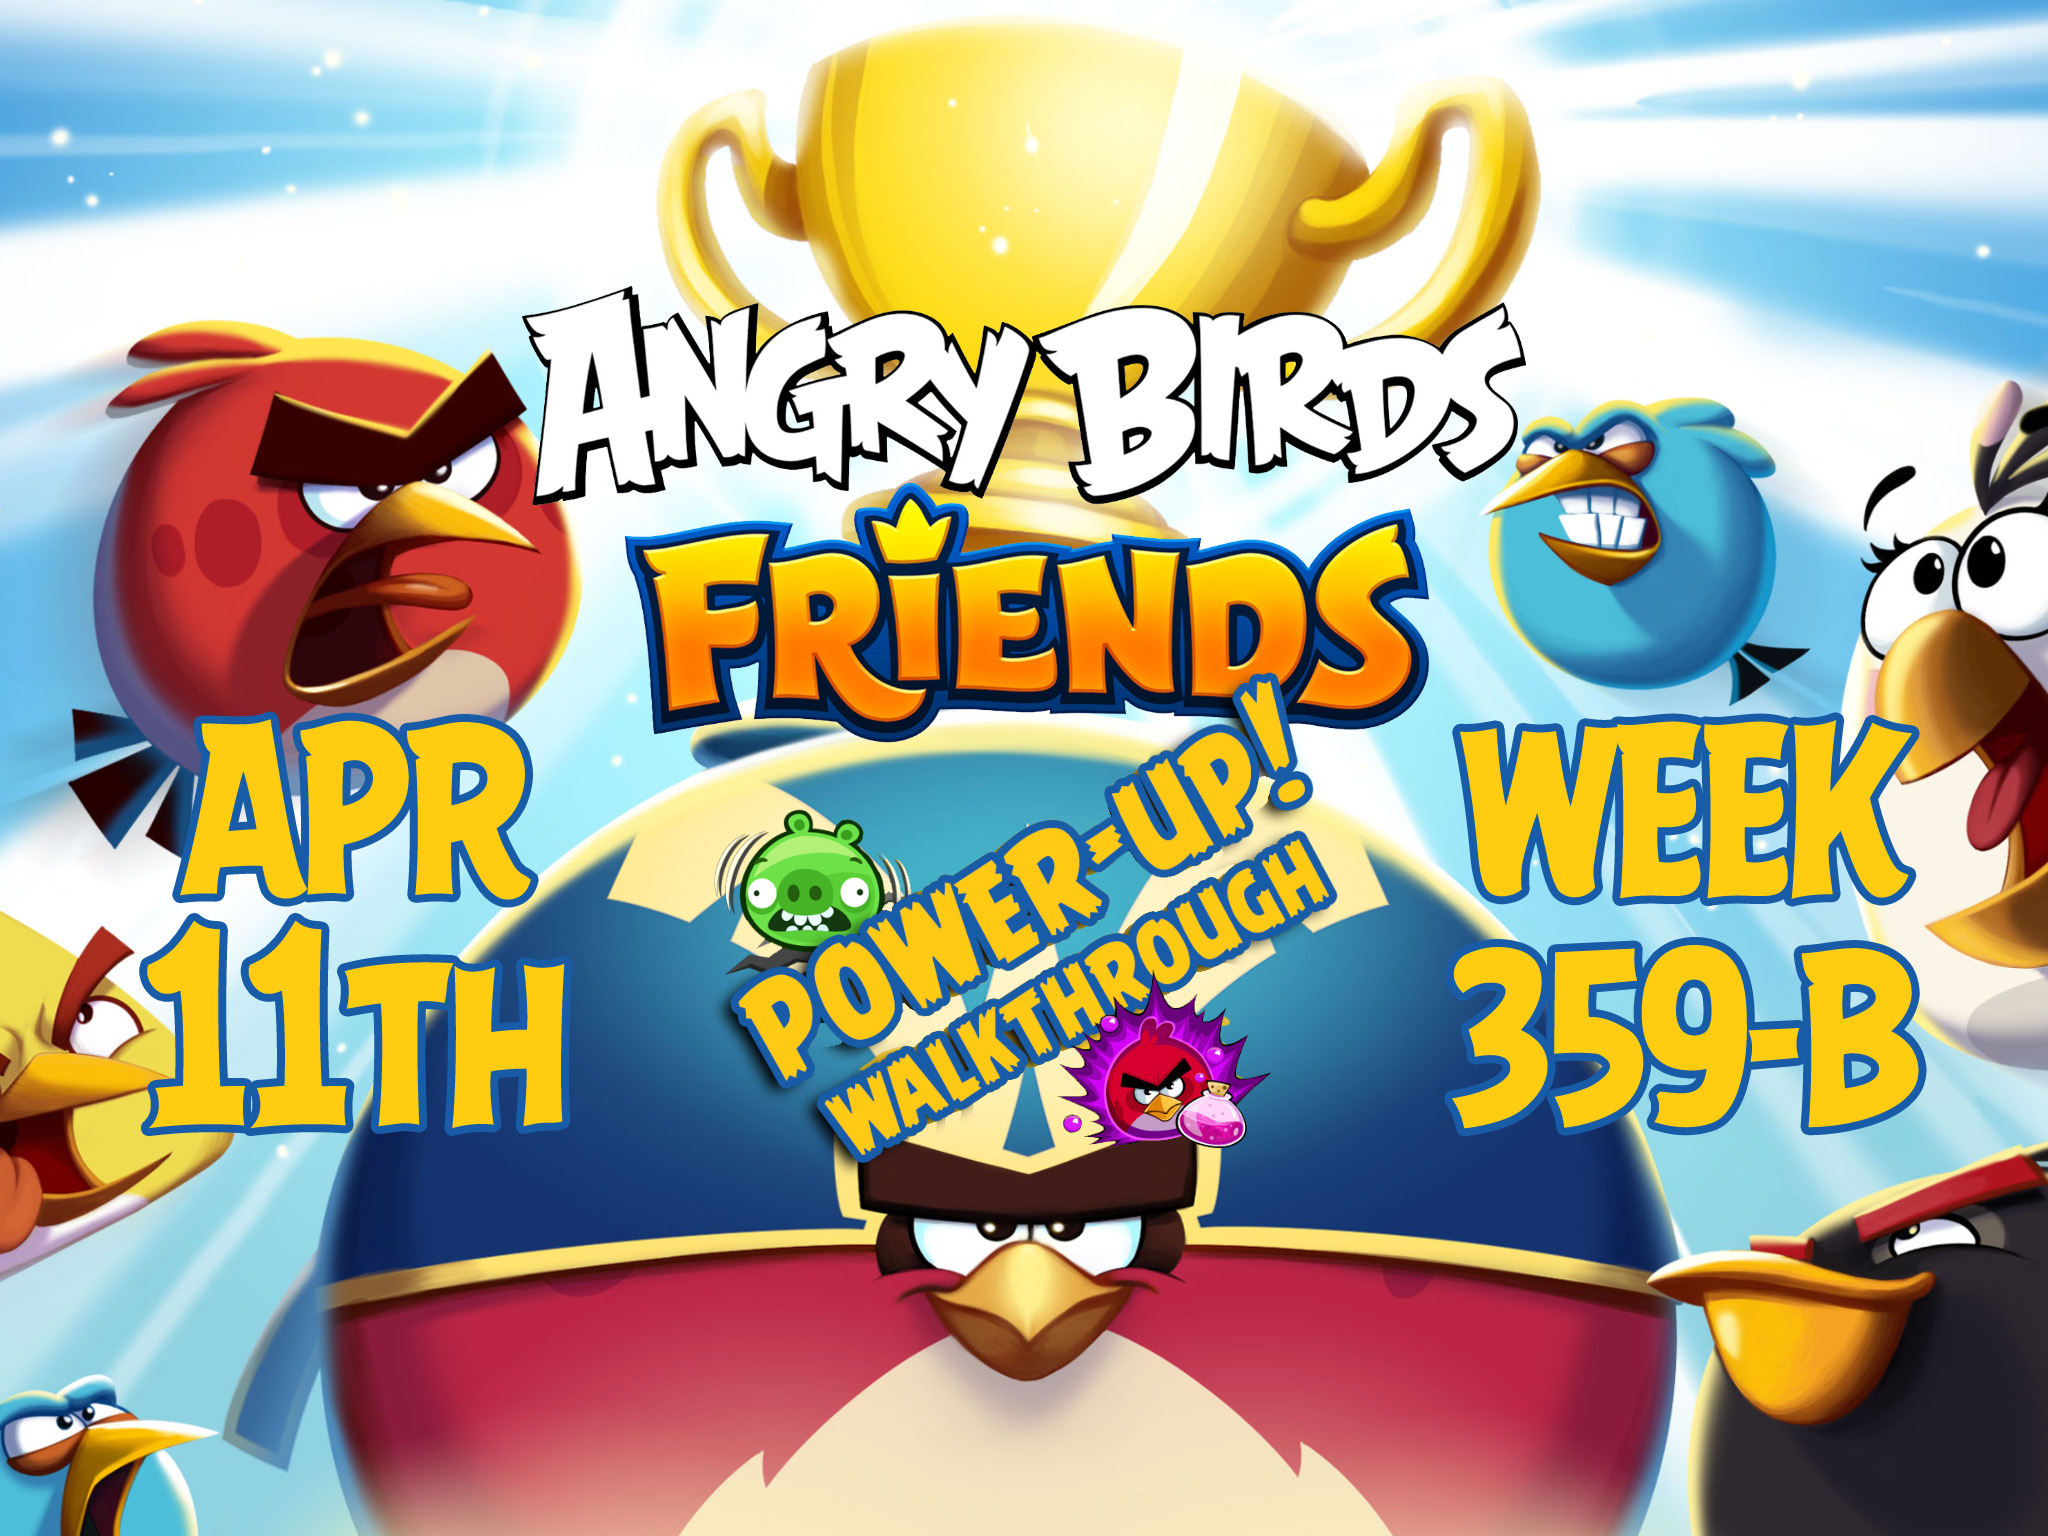 Angry-Birds-Friends-Tournament-Week-359-B-Feature-Image-PU